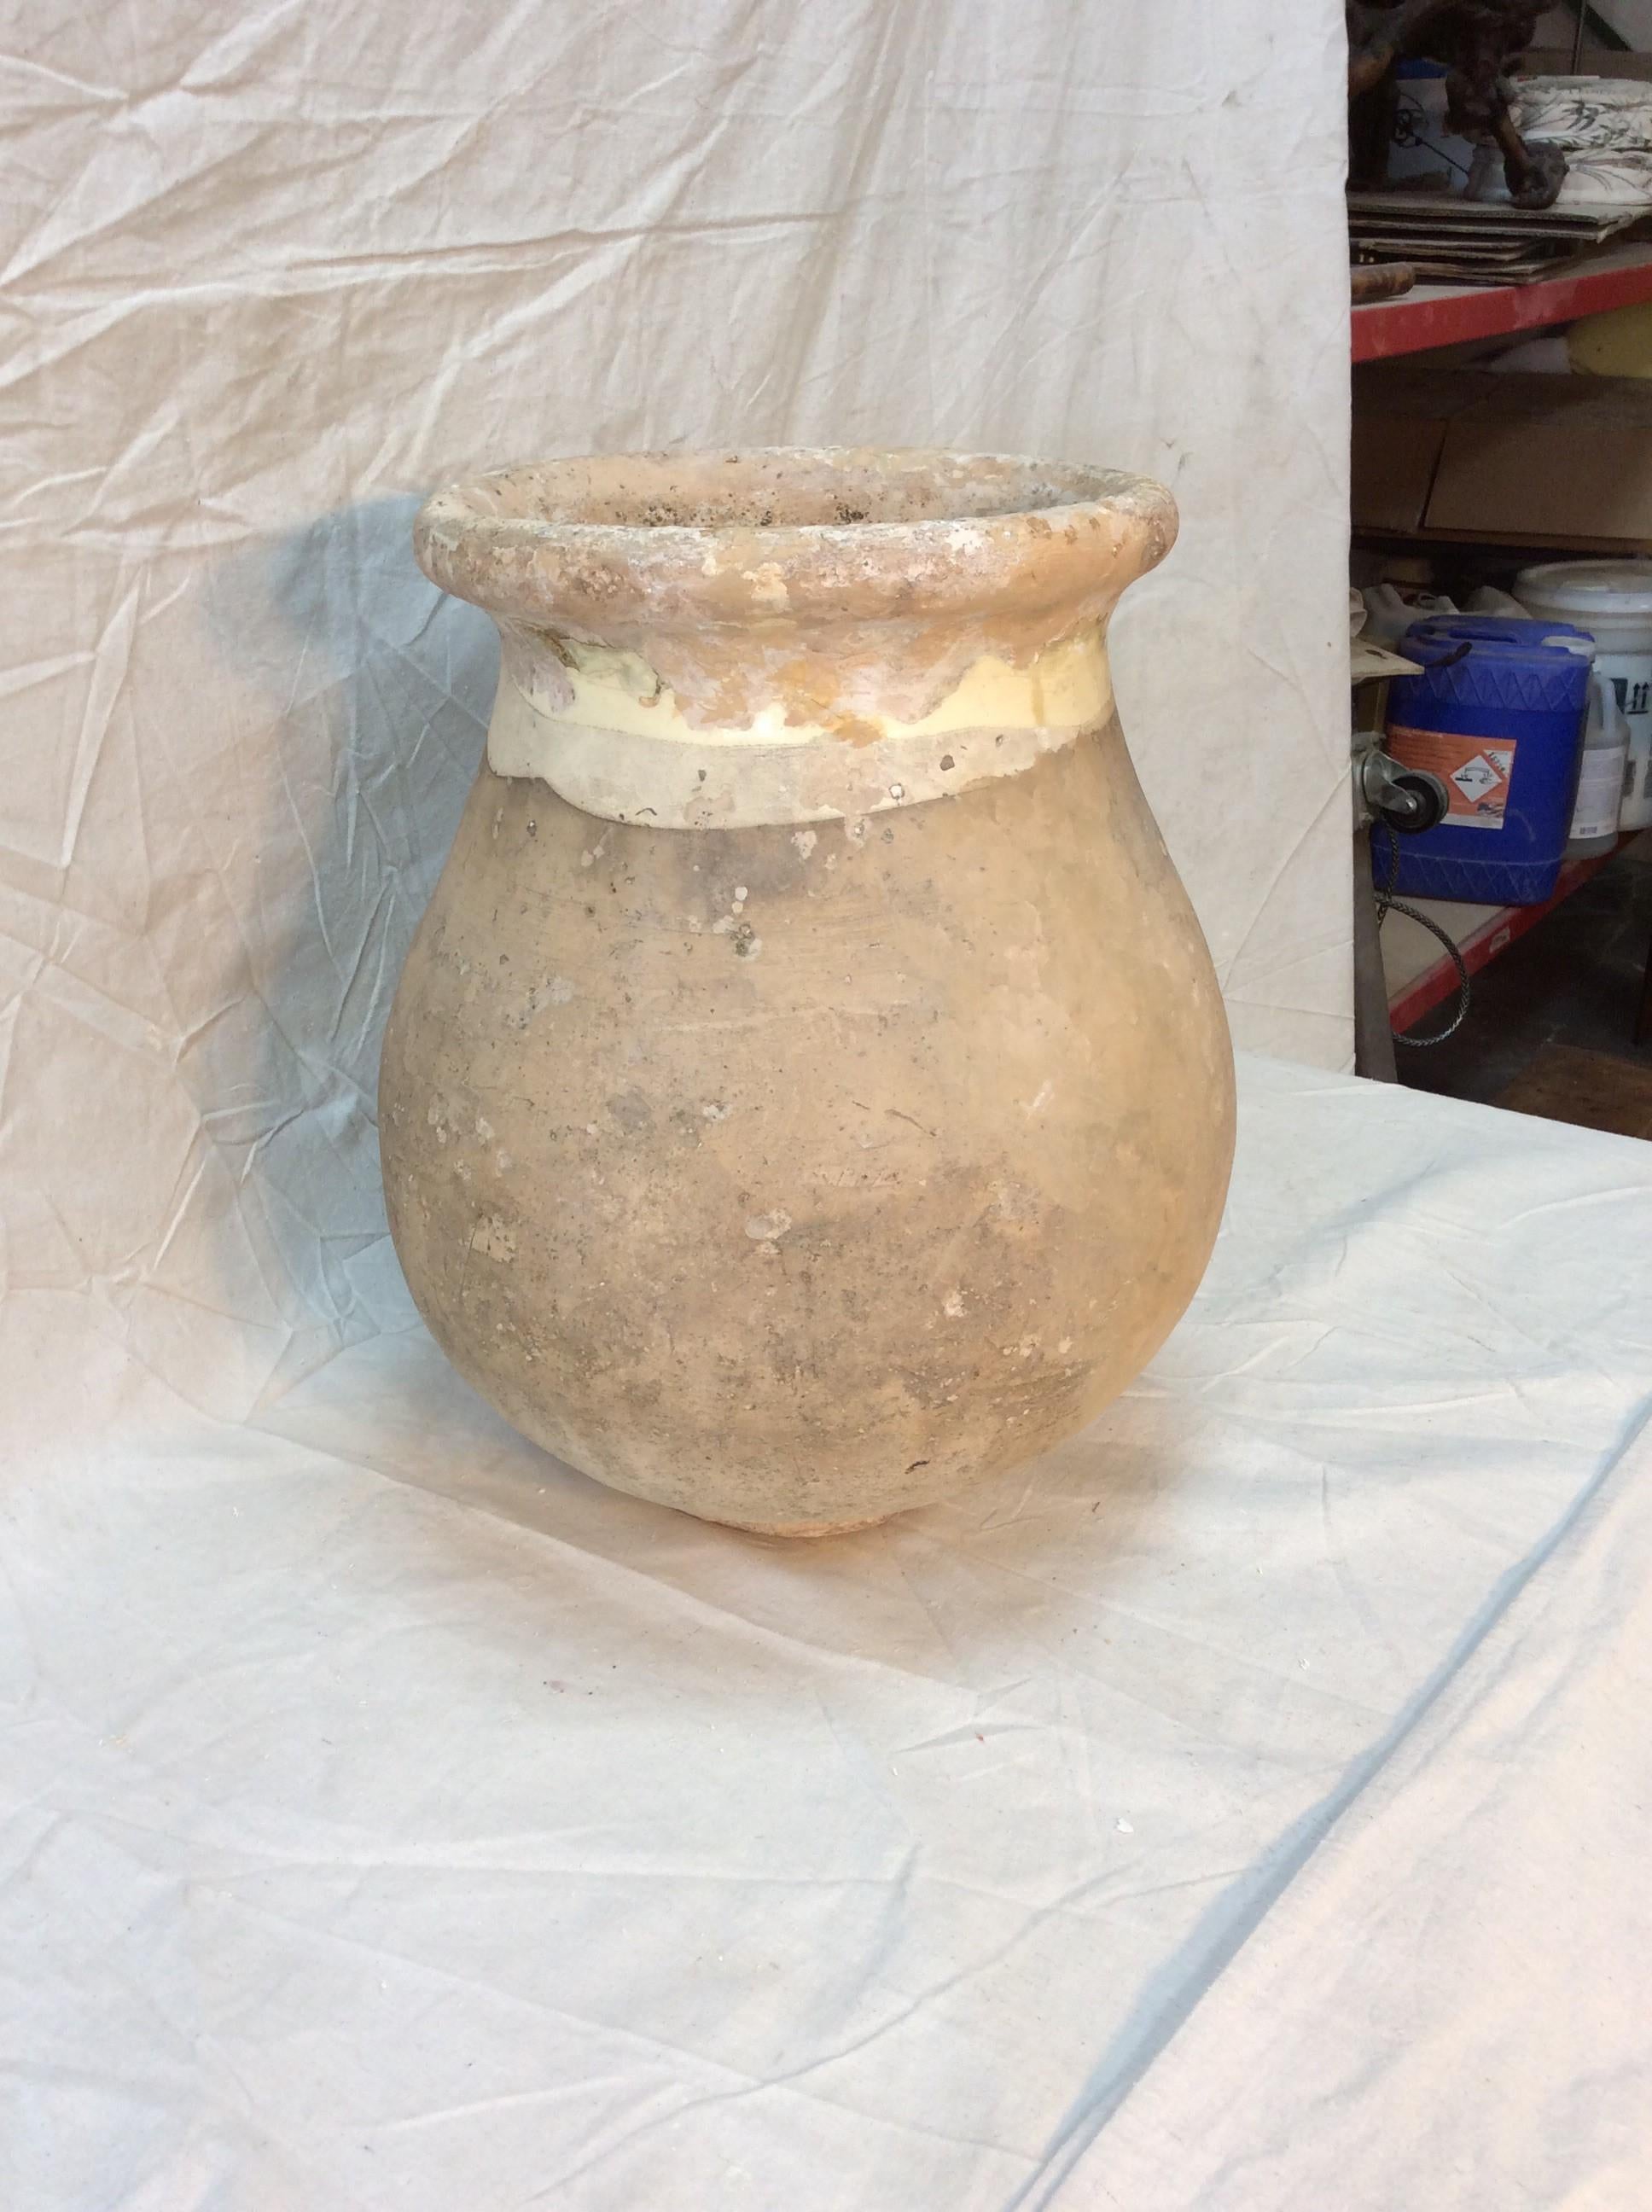 This is a beautiful French olive jar from the Provençal town of Biot, France and features a lovely aged patina and pale yellow-glazed rolled edge and interior. The Alpes- Maritimes region of France has been known as a pottery center from the 18th